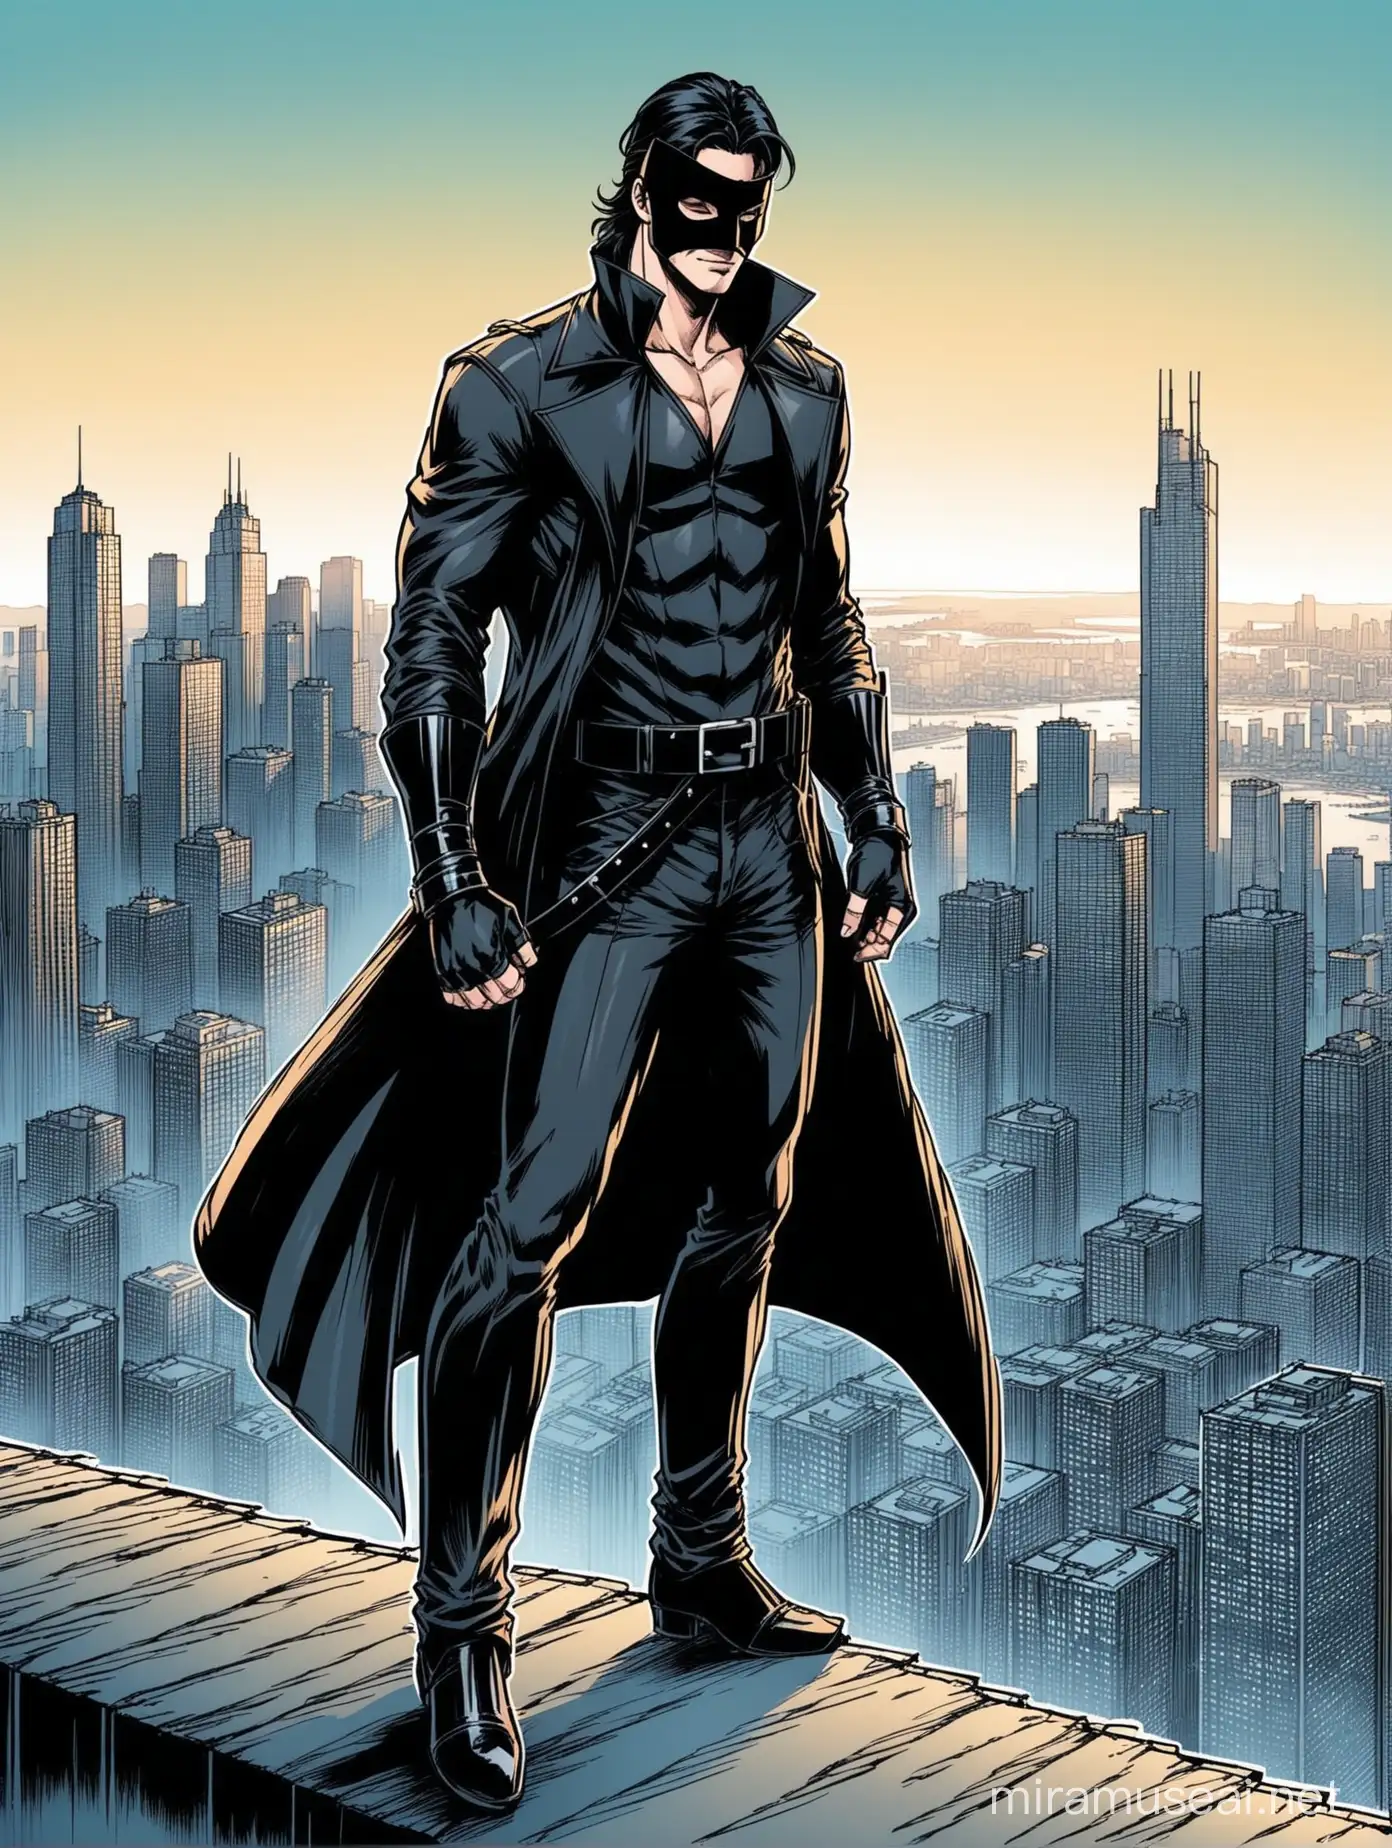 American comic book drawing style of a handsome superhero wearing a long black leather closing coat, black hair, a black Leather Zorro Mask covering only his eyes, black pants, long black shoes, and black fingerless gloves, standing on the edge of a skyscraper, with a Skyline of the city in the background. The belt is not showing